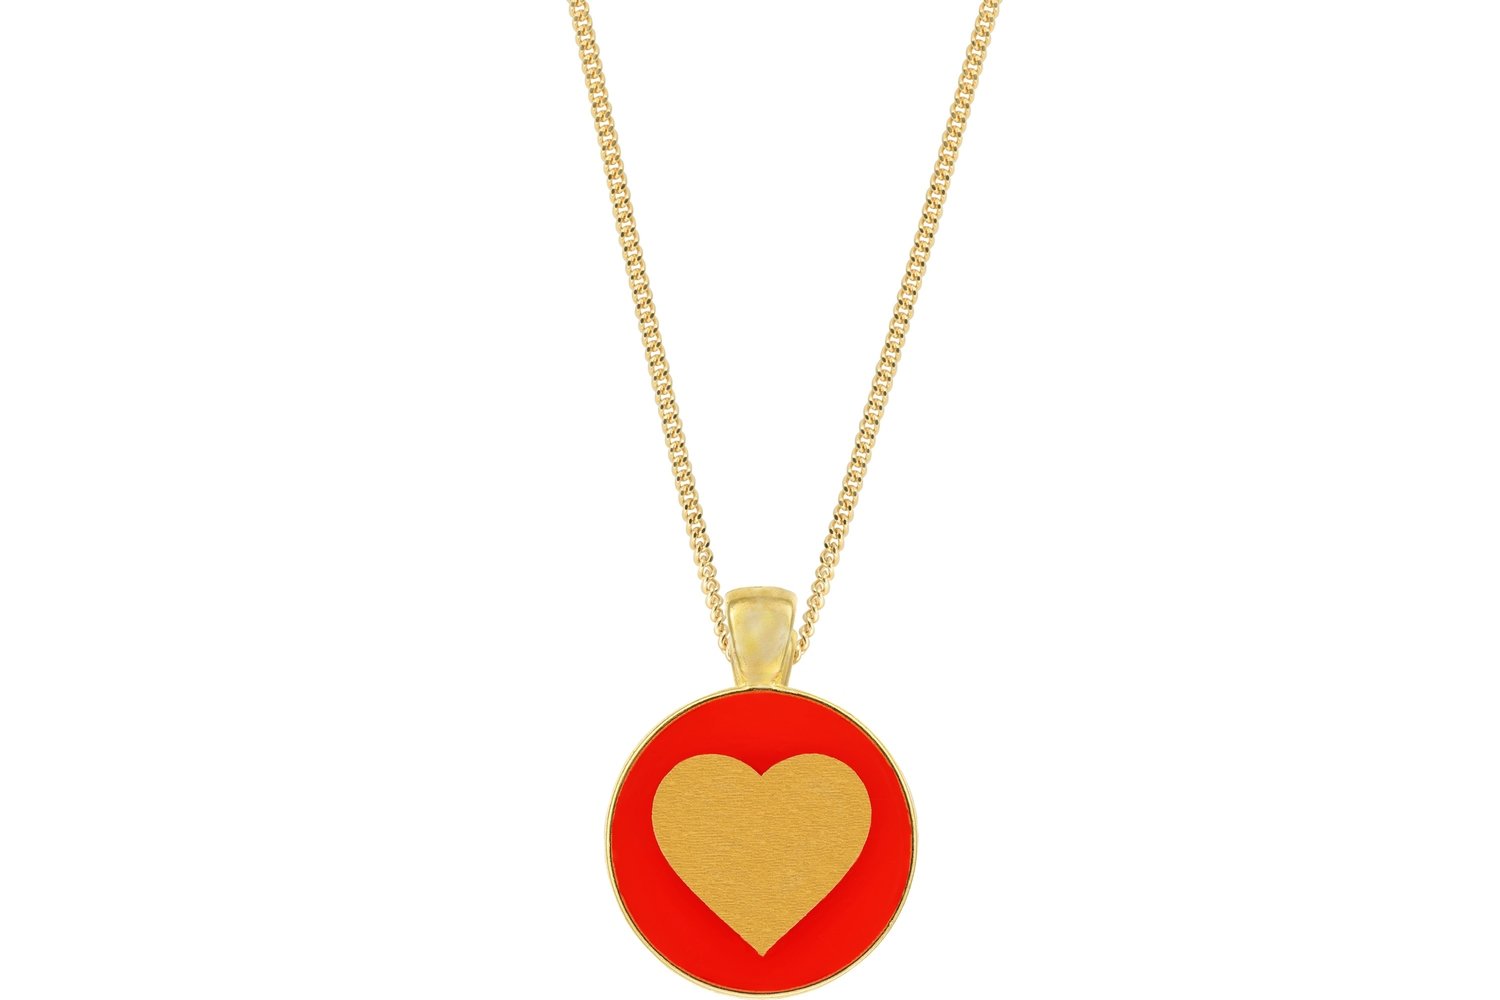 Heart Pendant Classic Style with Bezel on Chain Necklace